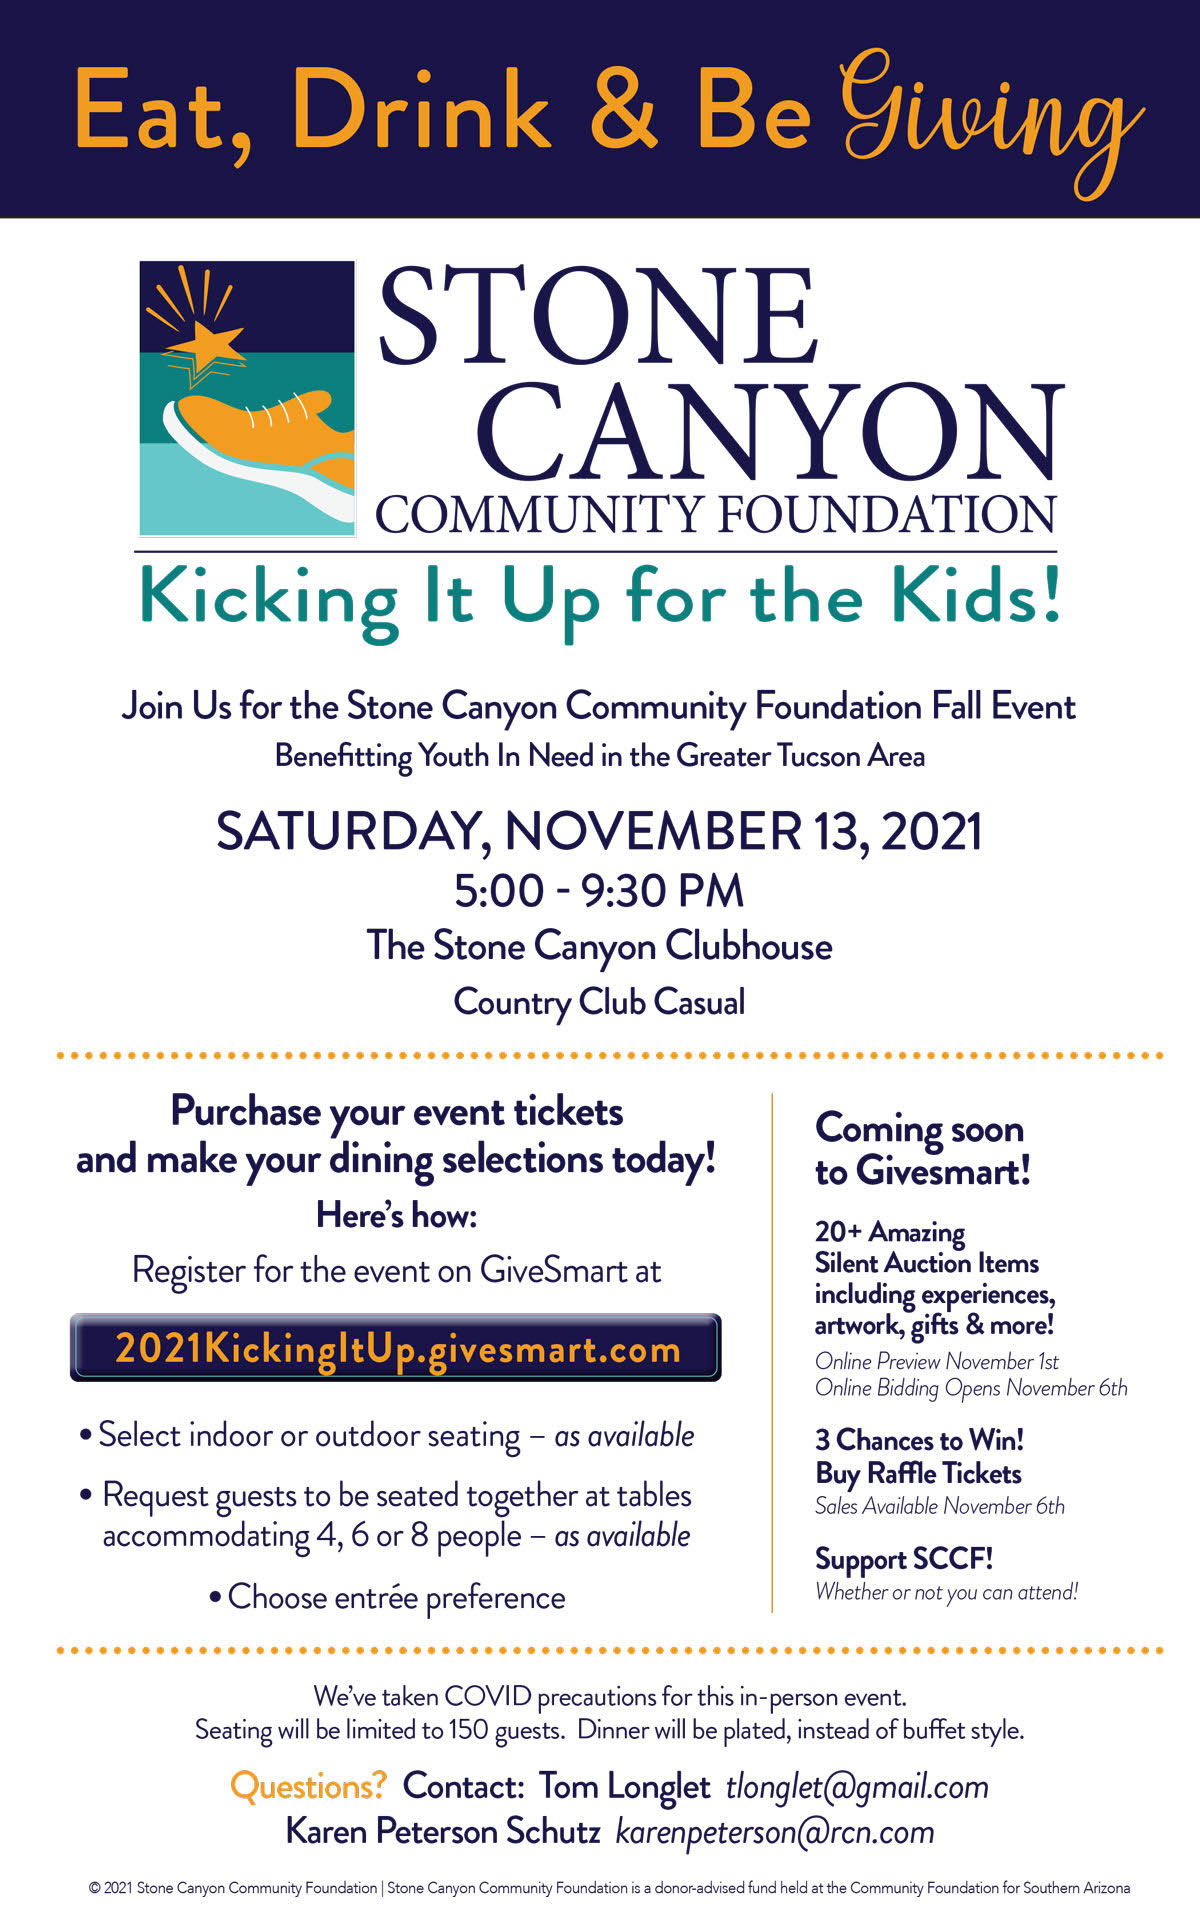 Stone Canyon Community Foundation - Kicking it up for the Kids 2021 Save the Date